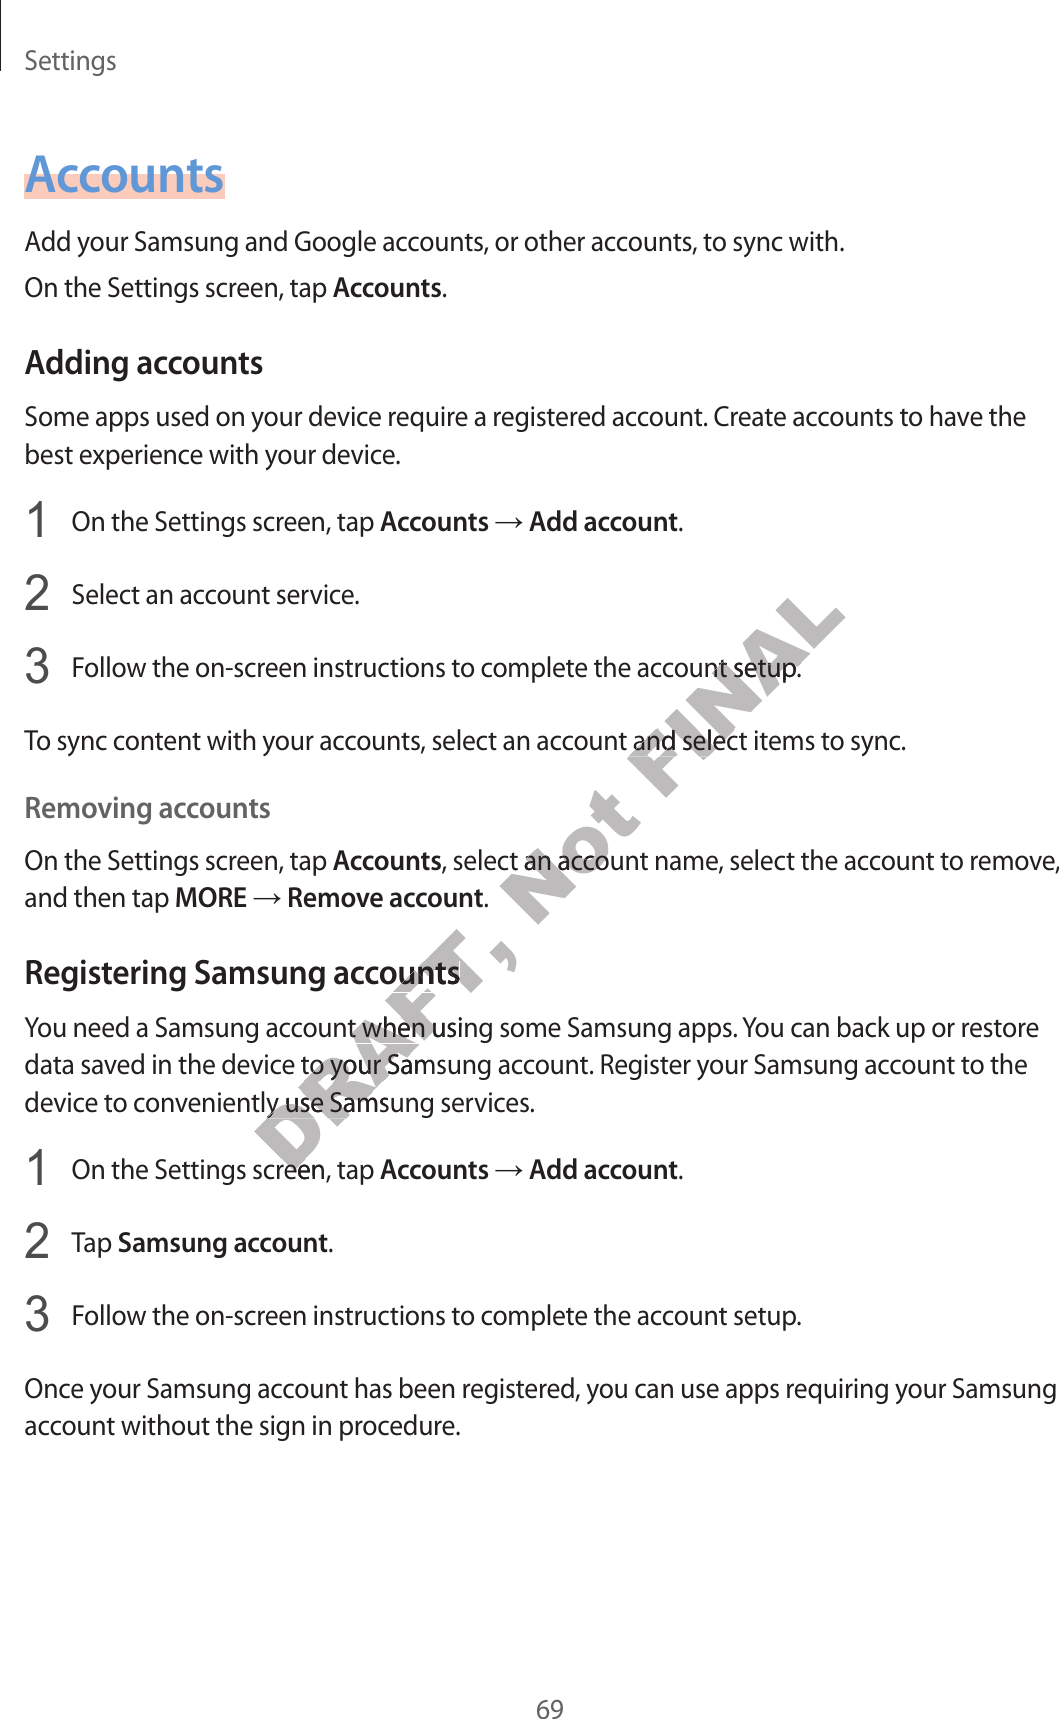 Settings69AccountsAdd y our Samsung and Google accoun ts , or other acc ounts, to sync with.On the Settings screen, tap Accounts.Adding ac c oun tsSome apps used on your device r equir e a r egist er ed ac coun t. Cr ea te ac coun ts to ha v e the best experience with your devic e .1  On the Settings screen, tap Accounts → Add ac c ount.2  Select an account service.3  Follow the on-screen instructions to complete the acc ount setup.To sync conten t with y our acc ounts , select an accoun t and select items to sync .Removing acc oun tsOn the Settings screen, tap Accounts, select an account name, select the accoun t to r emo v e , and then tap MORE → Remov e acc oun t.Registering Samsung acc ountsYou need a Samsung account when using some Samsung apps . You can back up or restor e data sav ed in the devic e to y our Samsung acc ount . Regist er y our Samsung accoun t to the device to c on v eniently use Samsung services.1  On the Settings screen, tap Accounts → Add ac c ount.2  Tap Samsung account.3  Follow the on-screen instructions to complete the acc ount setup.Once your Samsung ac coun t has been r egist er ed , y ou can use apps r equiring your Samsung account without the sig n in pr oc edur e .DRAFT, Registering Samsung acc ountsDRAFT, Registering Samsung acc ountsYou need a Samsung account when using some Samsung apps . You can back up or restor e DRAFT, You need a Samsung account when using some Samsung apps . You can back up or restor e data sav ed in the devic e to y our Samsung acc ount . Regist er y our Samsung accoun t to the DRAFT, data sav ed in the devic e to y our Samsung acc ount . Regist er y our Samsung accoun t to the device to c on v eniently use Samsung services.DRAFT, device to c on v eniently use Samsung services.On the Settings screen, tap DRAFT, On the Settings screen, tap Not , select an account name, select the accoun t to r emo v e , Not , select an account name, select the accoun t to r emo v e , FINALFollow the on-screen instructions to complete the acc ount setup.FINALFollow the on-screen instructions to complete the acc ount setup.To sync conten t with y our acc ounts , select an accoun t and select items to sync .FINALTo sync conten t with y our acc ounts , select an accoun t and select items to sync .